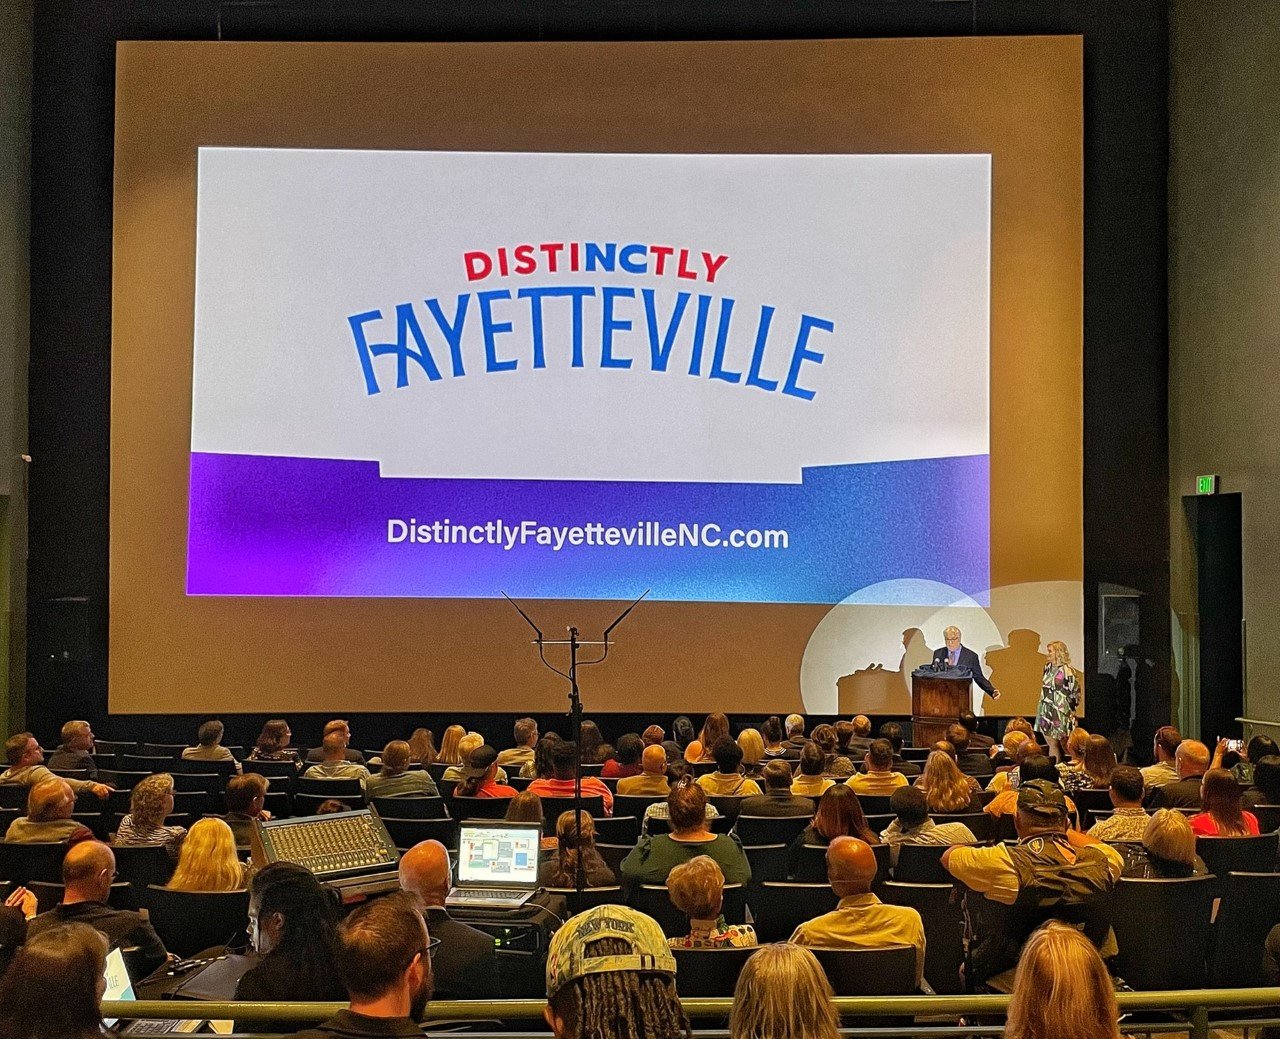 Randy Fiveash, interim president and CEO, reveals the new name and brand identity for the Fayetteville Area Convention and Visitors Bureau on Tuesday night at the Airborne & Special Operations Museum.